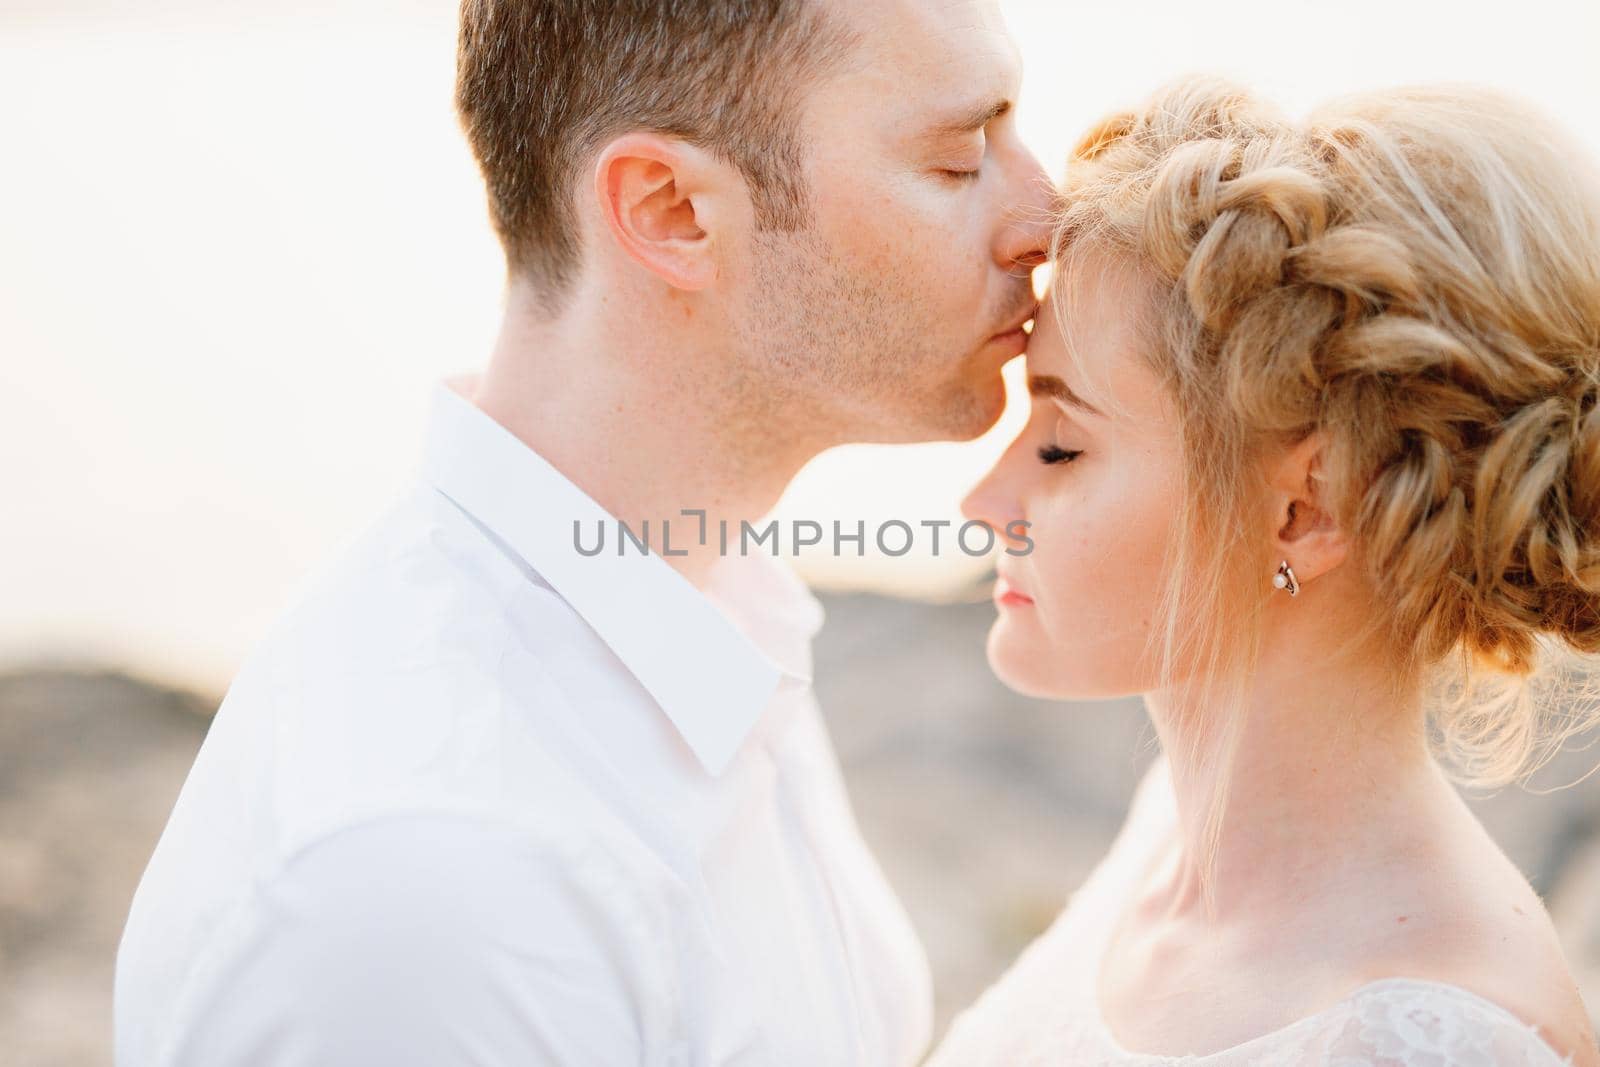 The groom gently kisses the bride on the forehead on the rocks by the sea, close-up. High quality photo